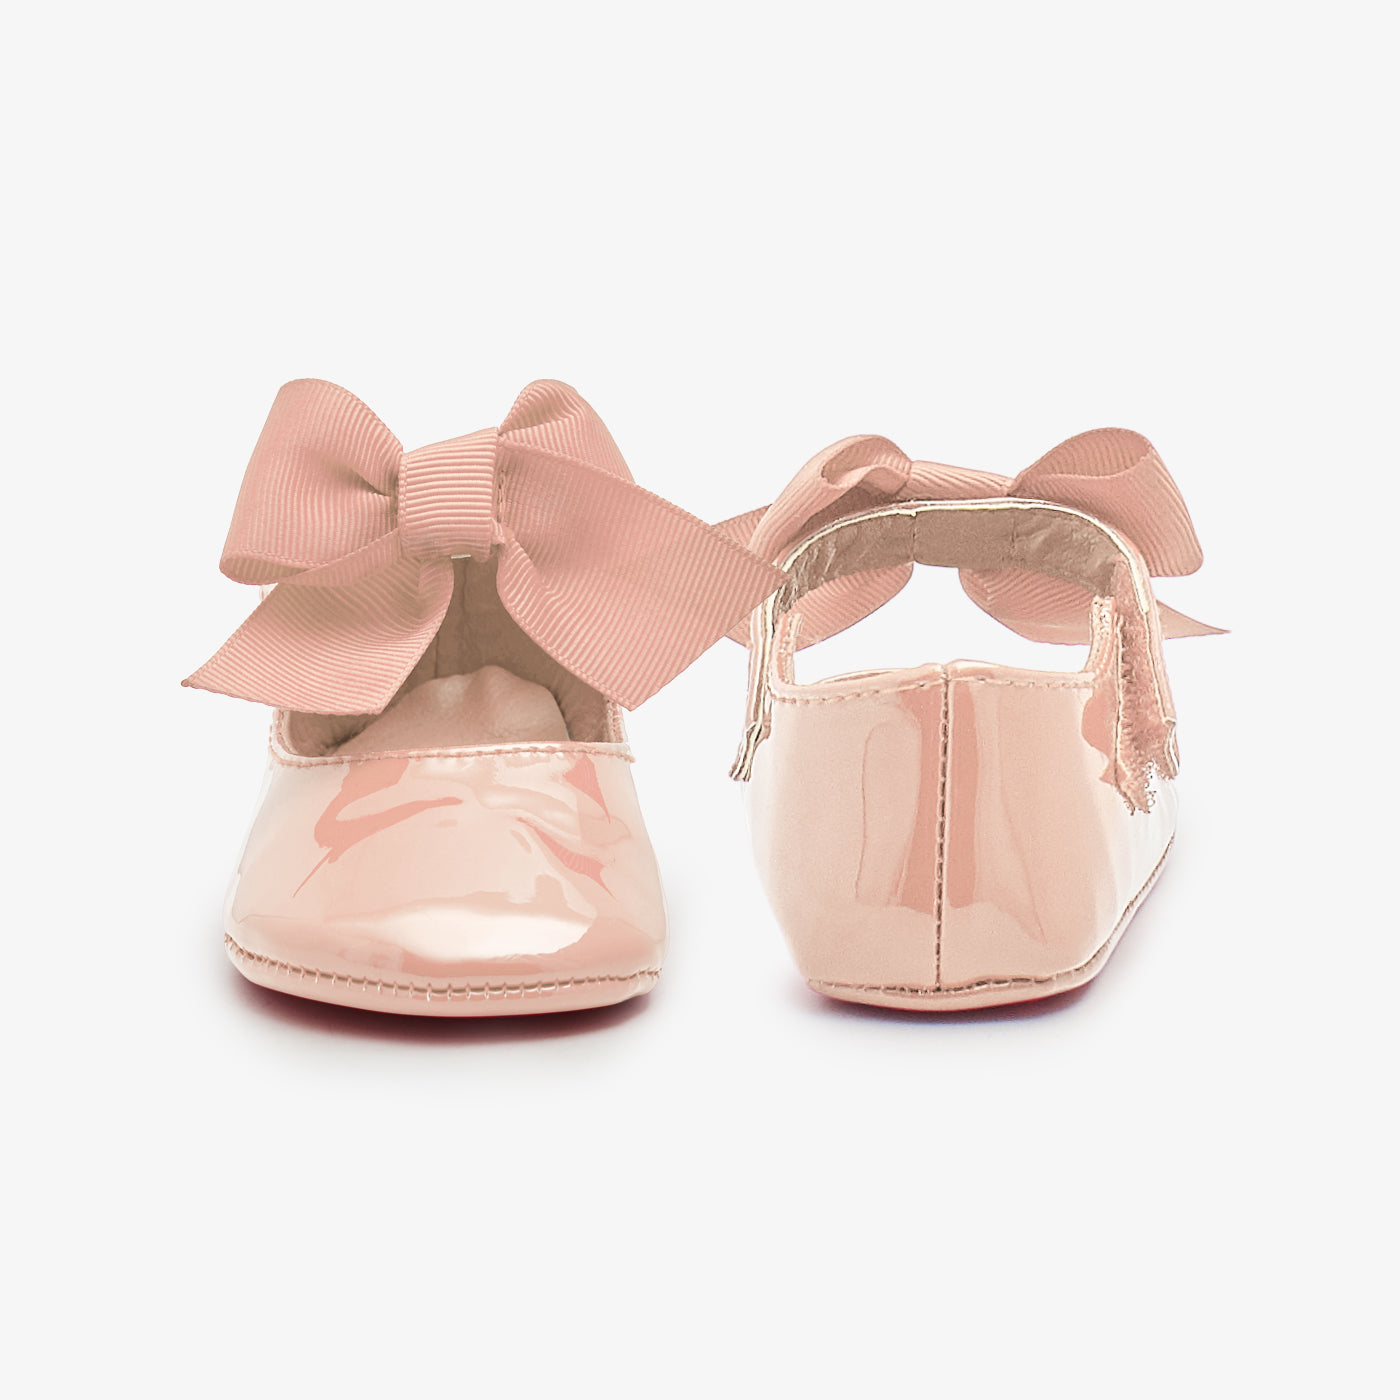 Cute Baby Girl Shoes